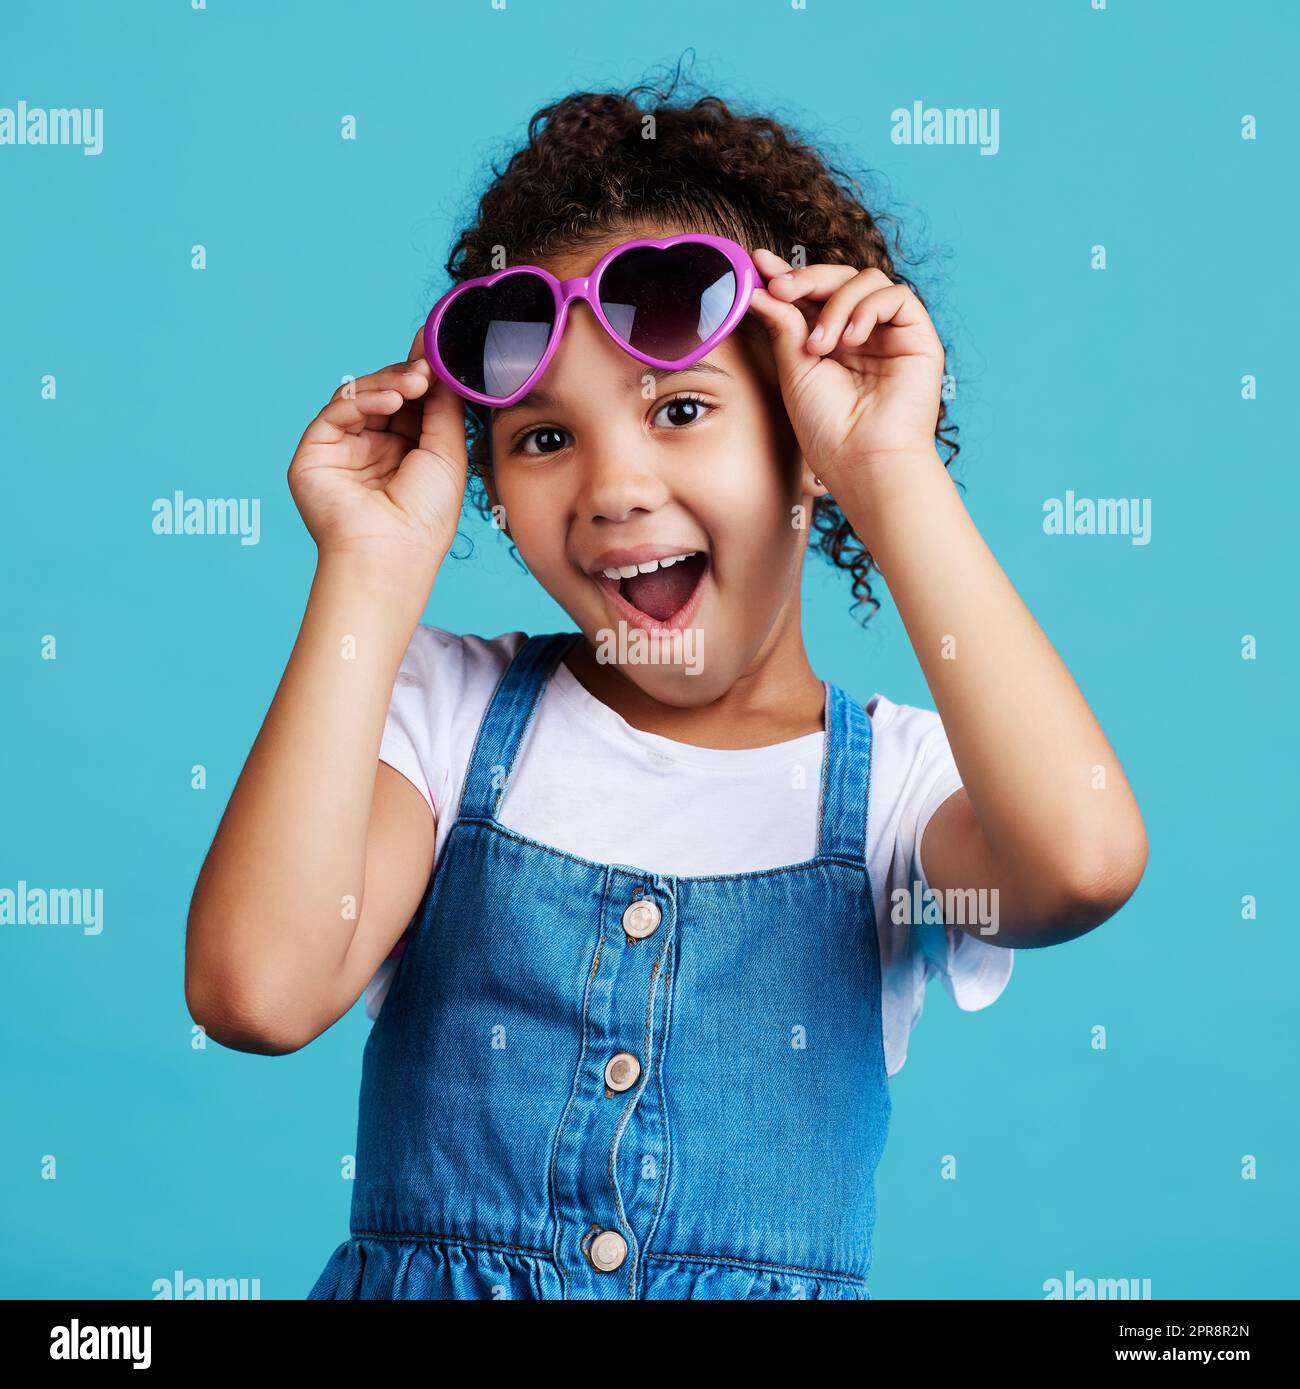 Dont I look cool. an adorable little girl posing against a blue background. Stock Photo